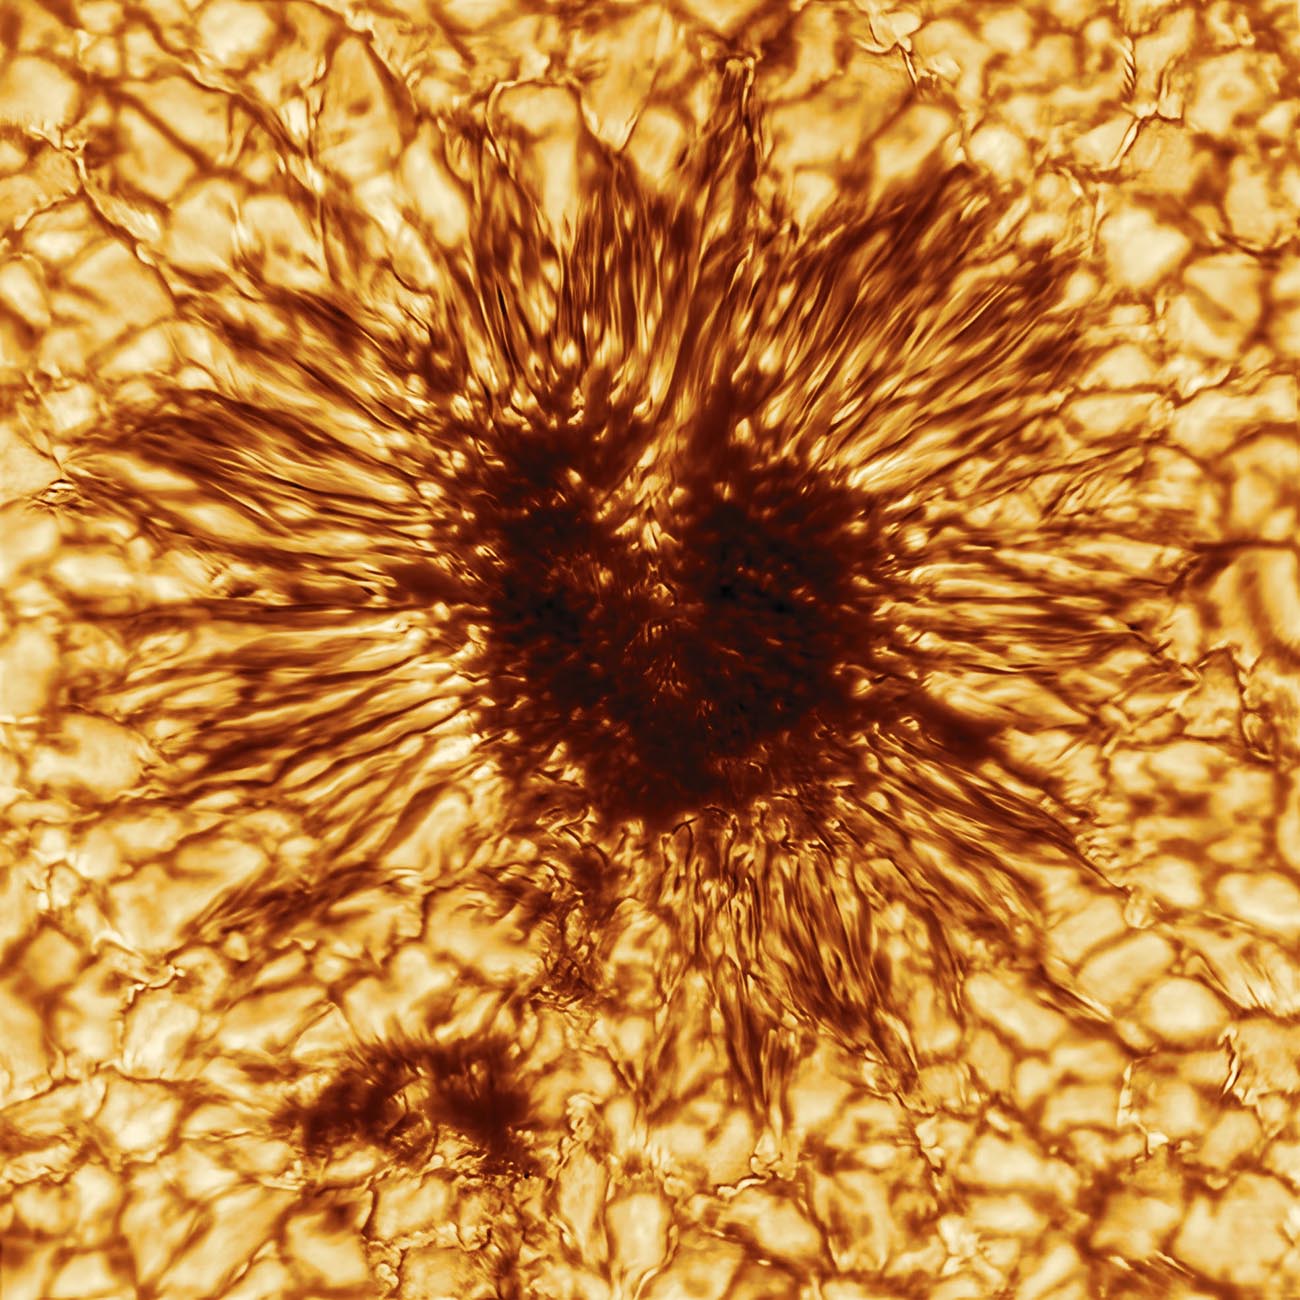 This is the first sunspot image taken on January 28, 2020 by the NSF’s Inouye Solar Telescope’s Wave Front Correction context viewer. 